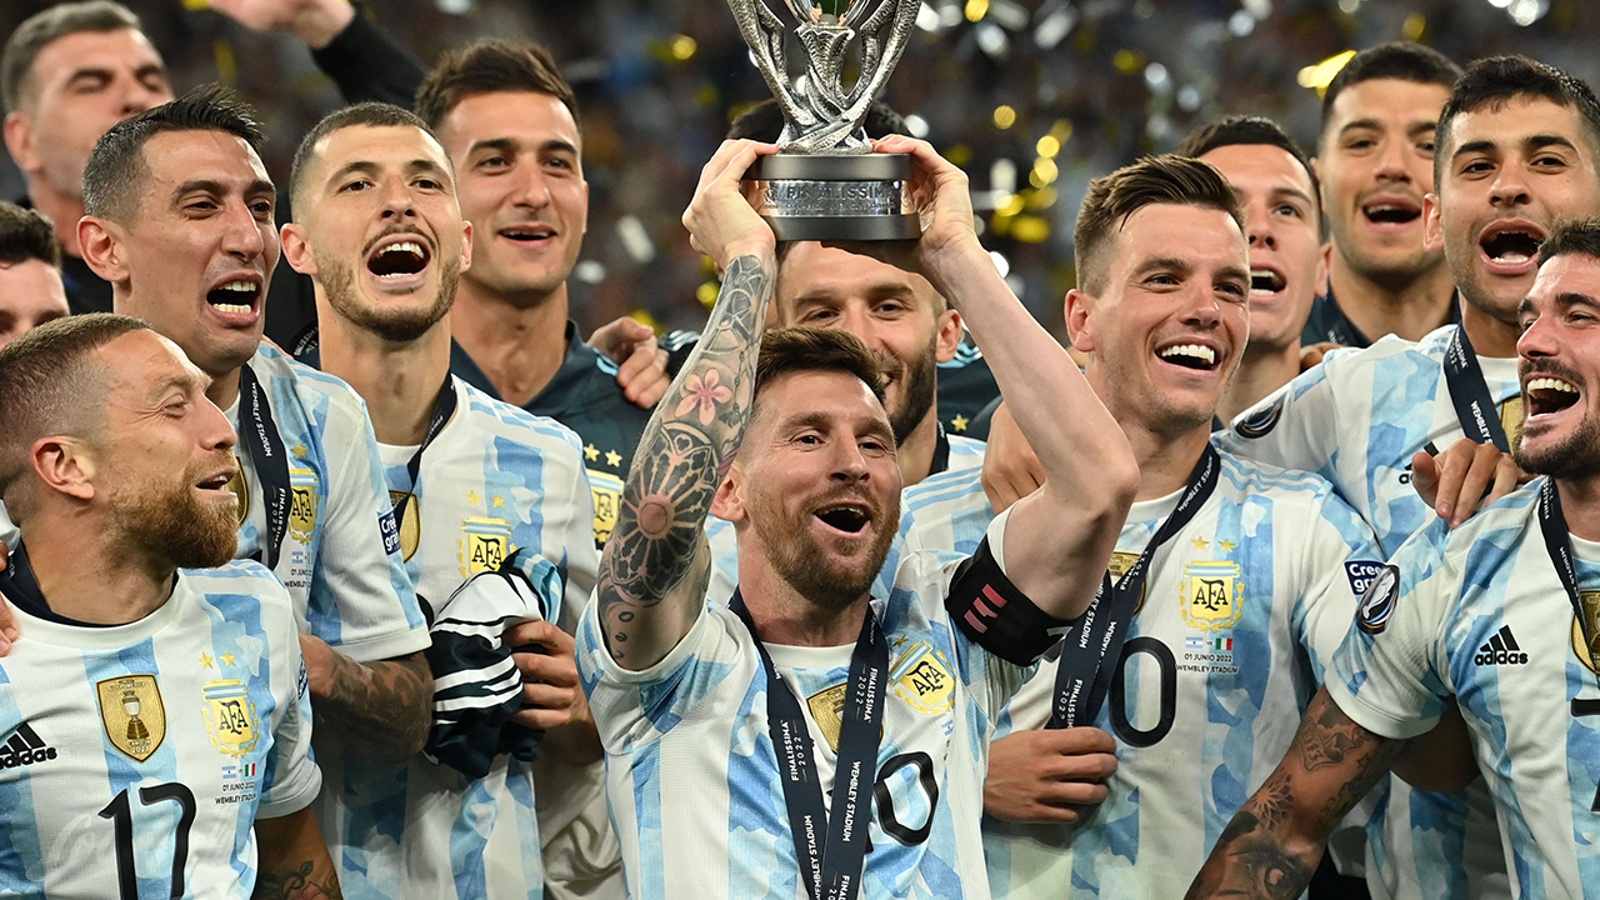 Argentina defeats Italy, 3-0, in the Finalissima behind an offensive attack led by Lionel Messi